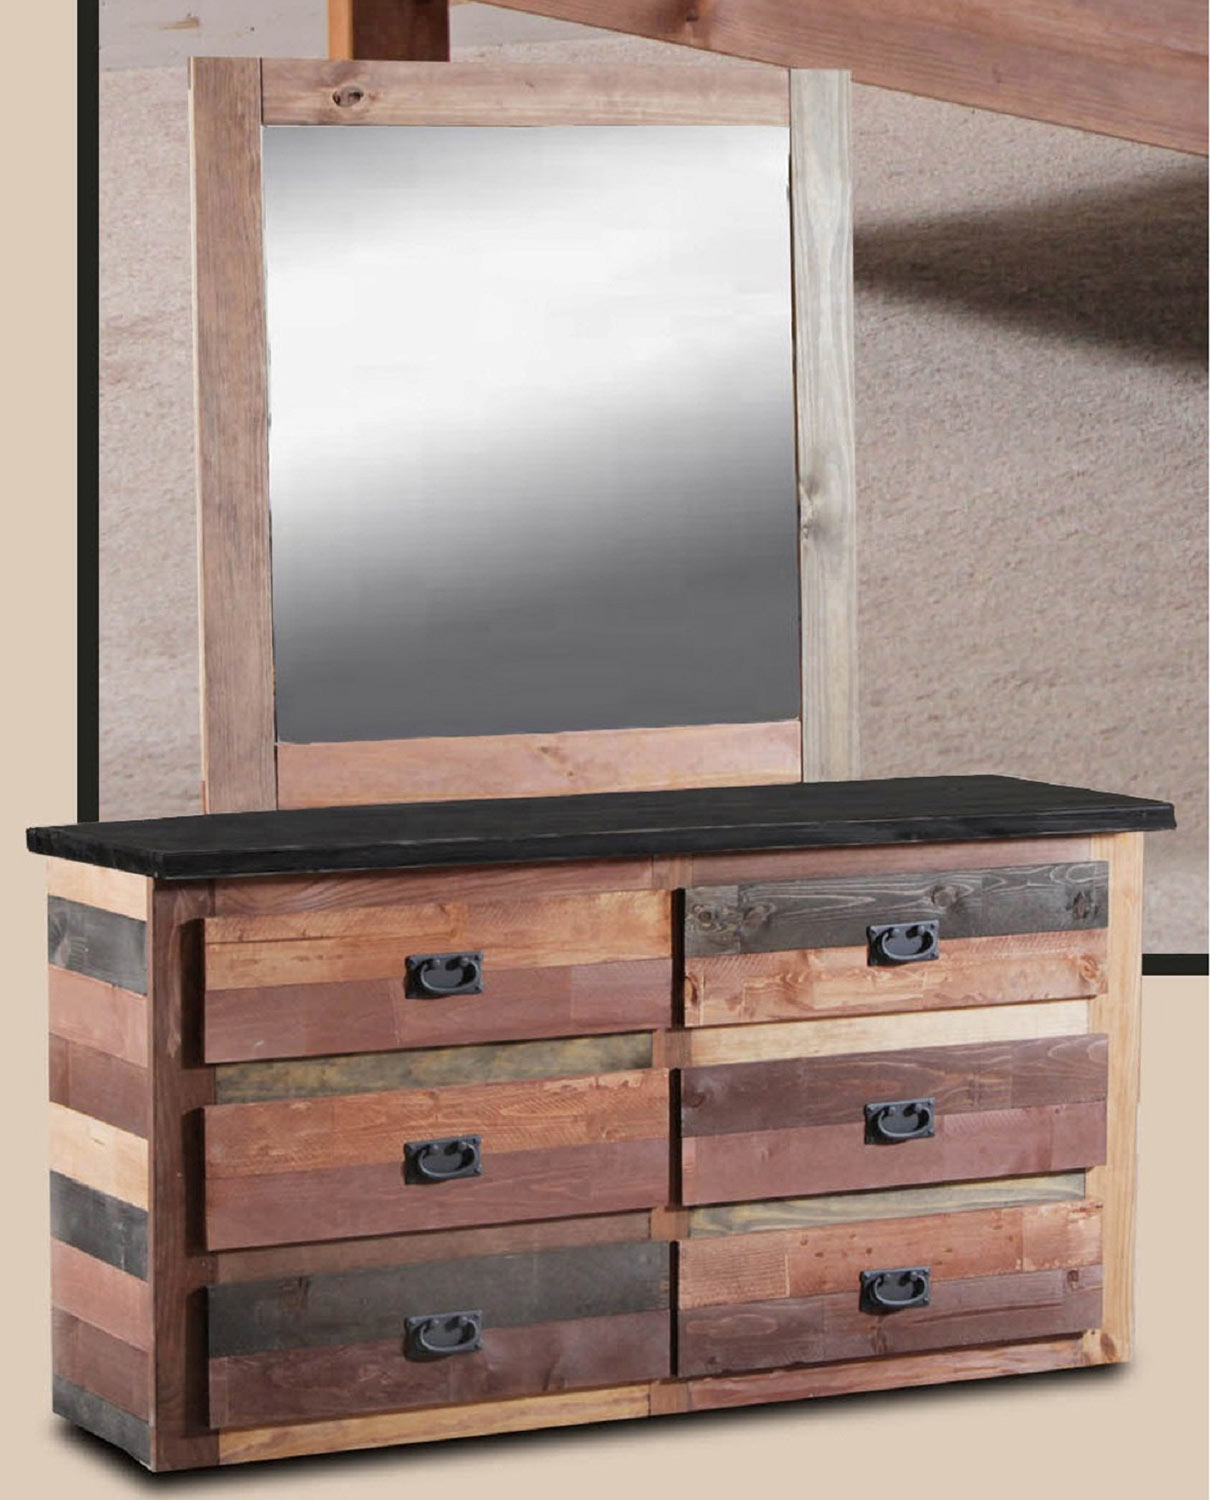 Chelsea Home 6 Drawer Dresser with Jumbo Mirror - Multi-Color